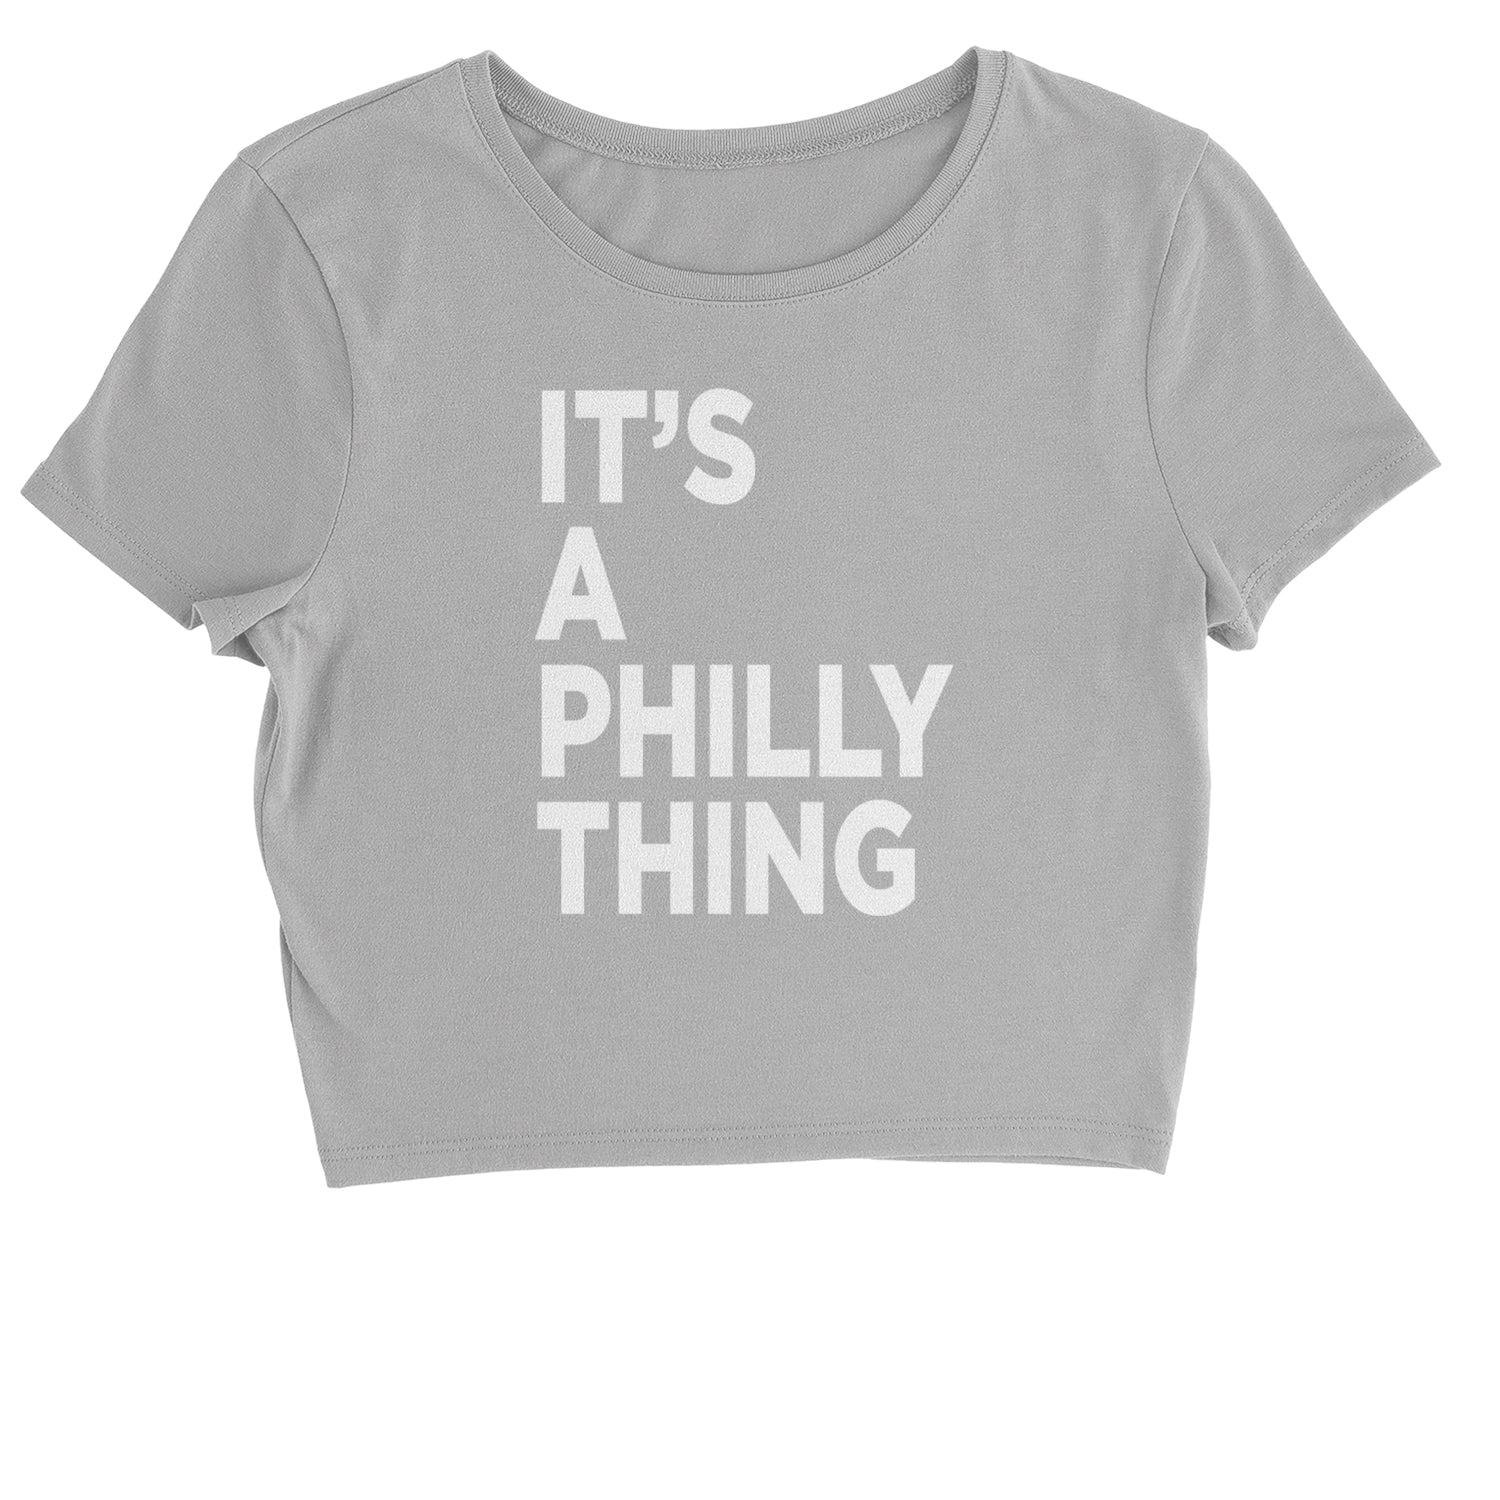 PHILLY It's A Philly Thing Cropped T-Shirt baseball, dilly, filly, football, jawn, morgan, Philadelphia, philli by Expression Tees